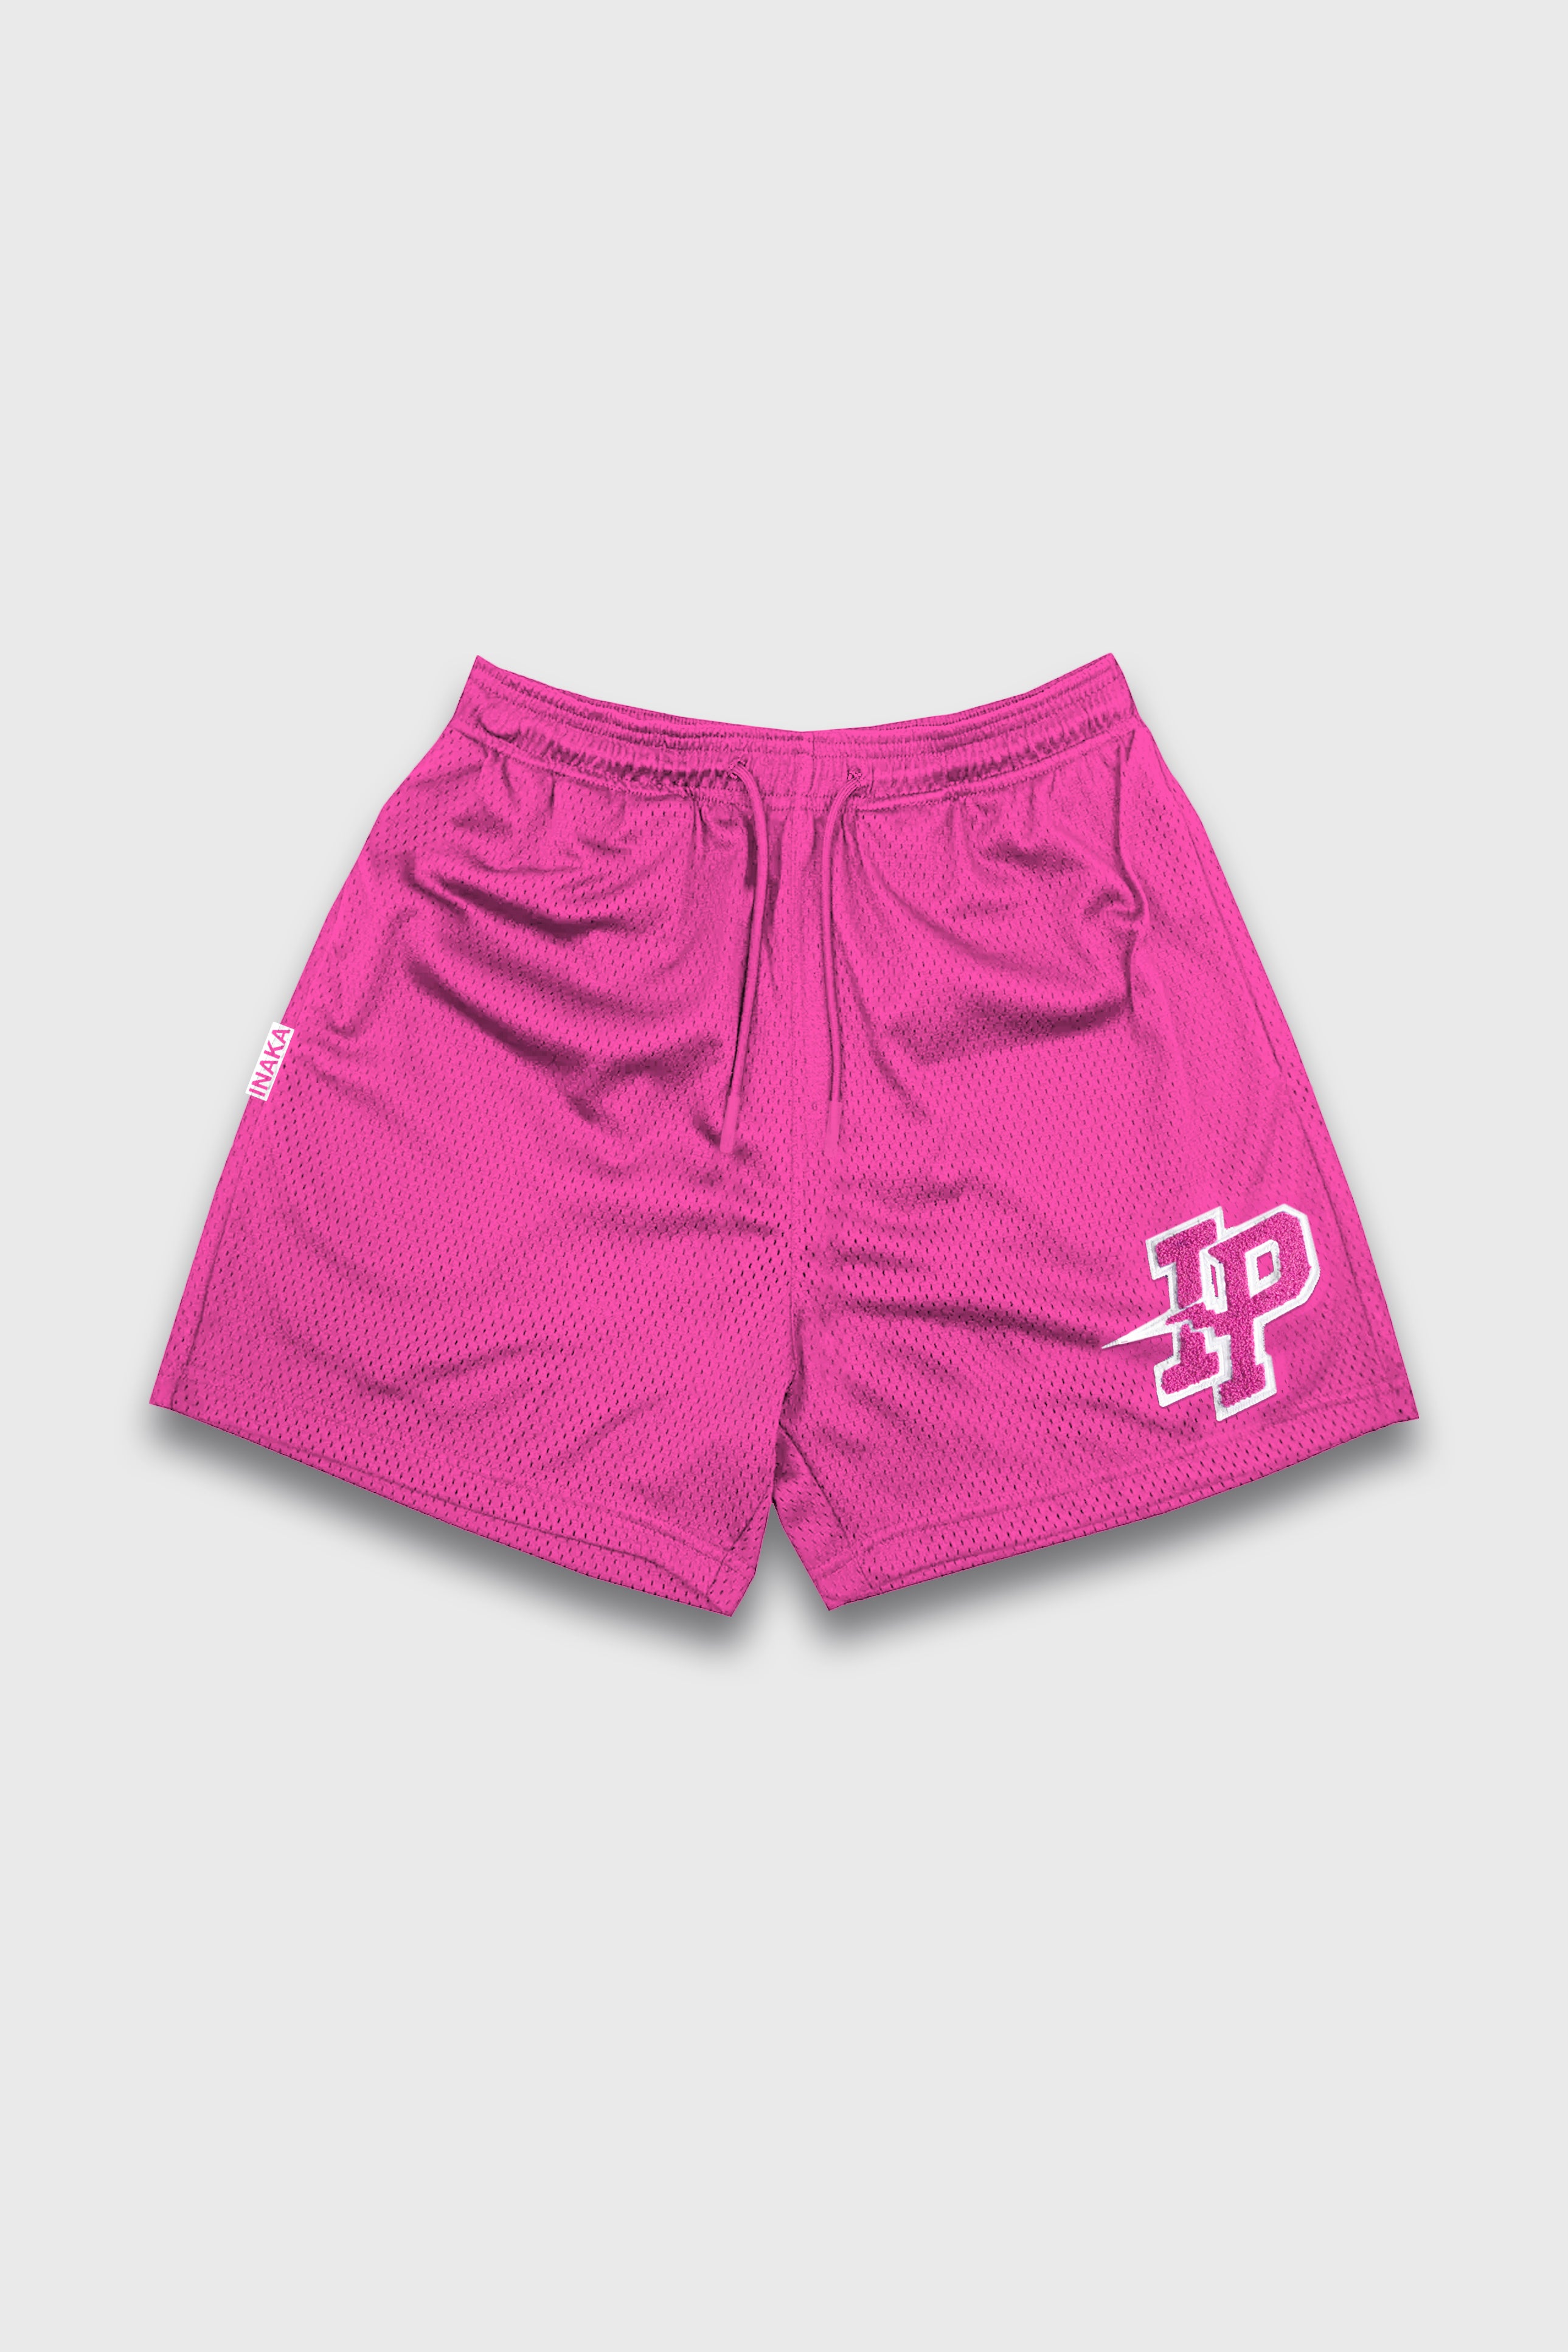 Shorts Los Angeles Pink Xóia! Fitness